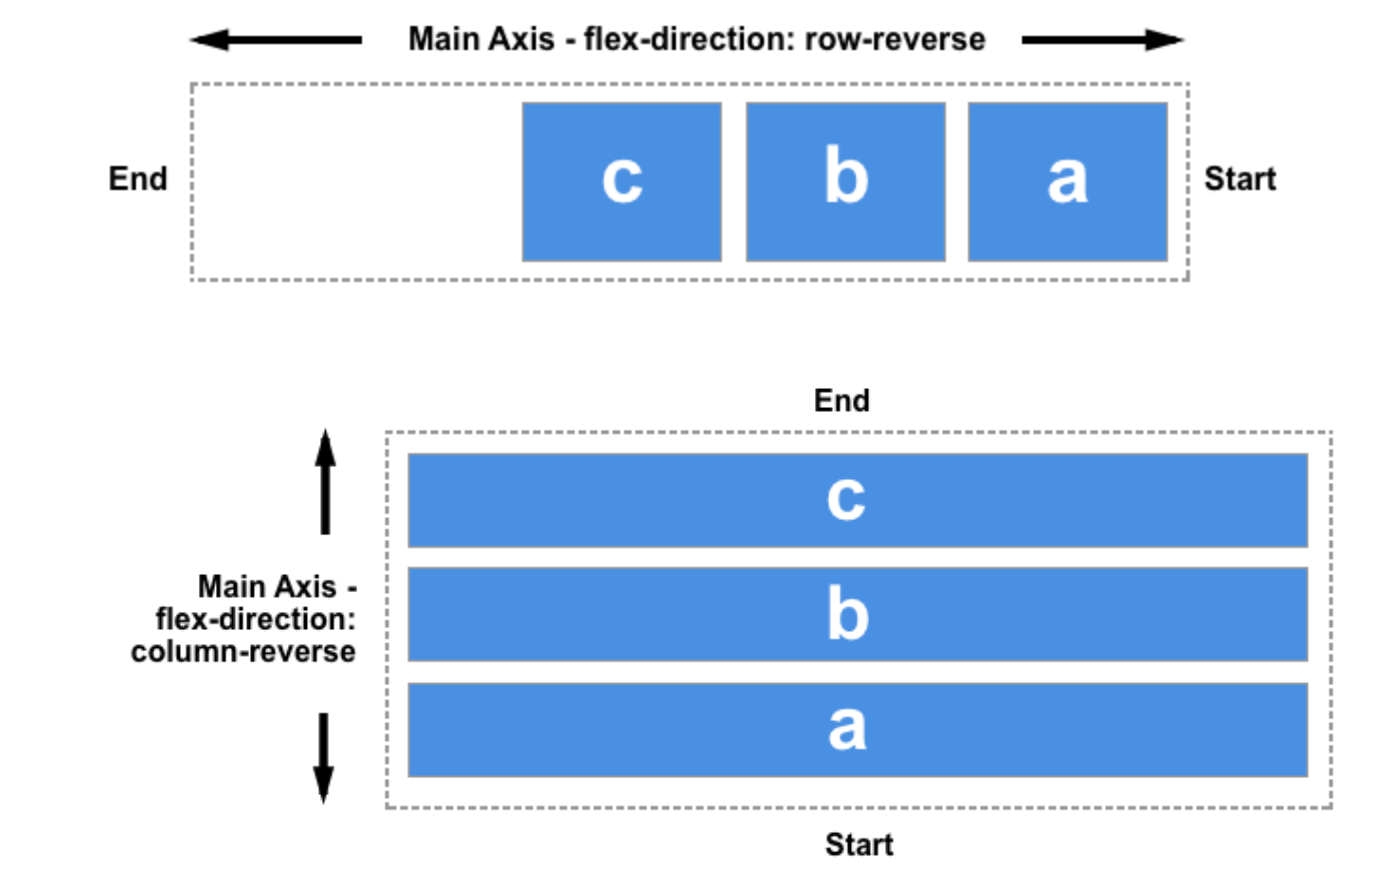 Image 1: Flex items are displayed in reverse order starting on the right-hand line. Image 2: The items are displayed in a column in reverse order starting at the bottom line.